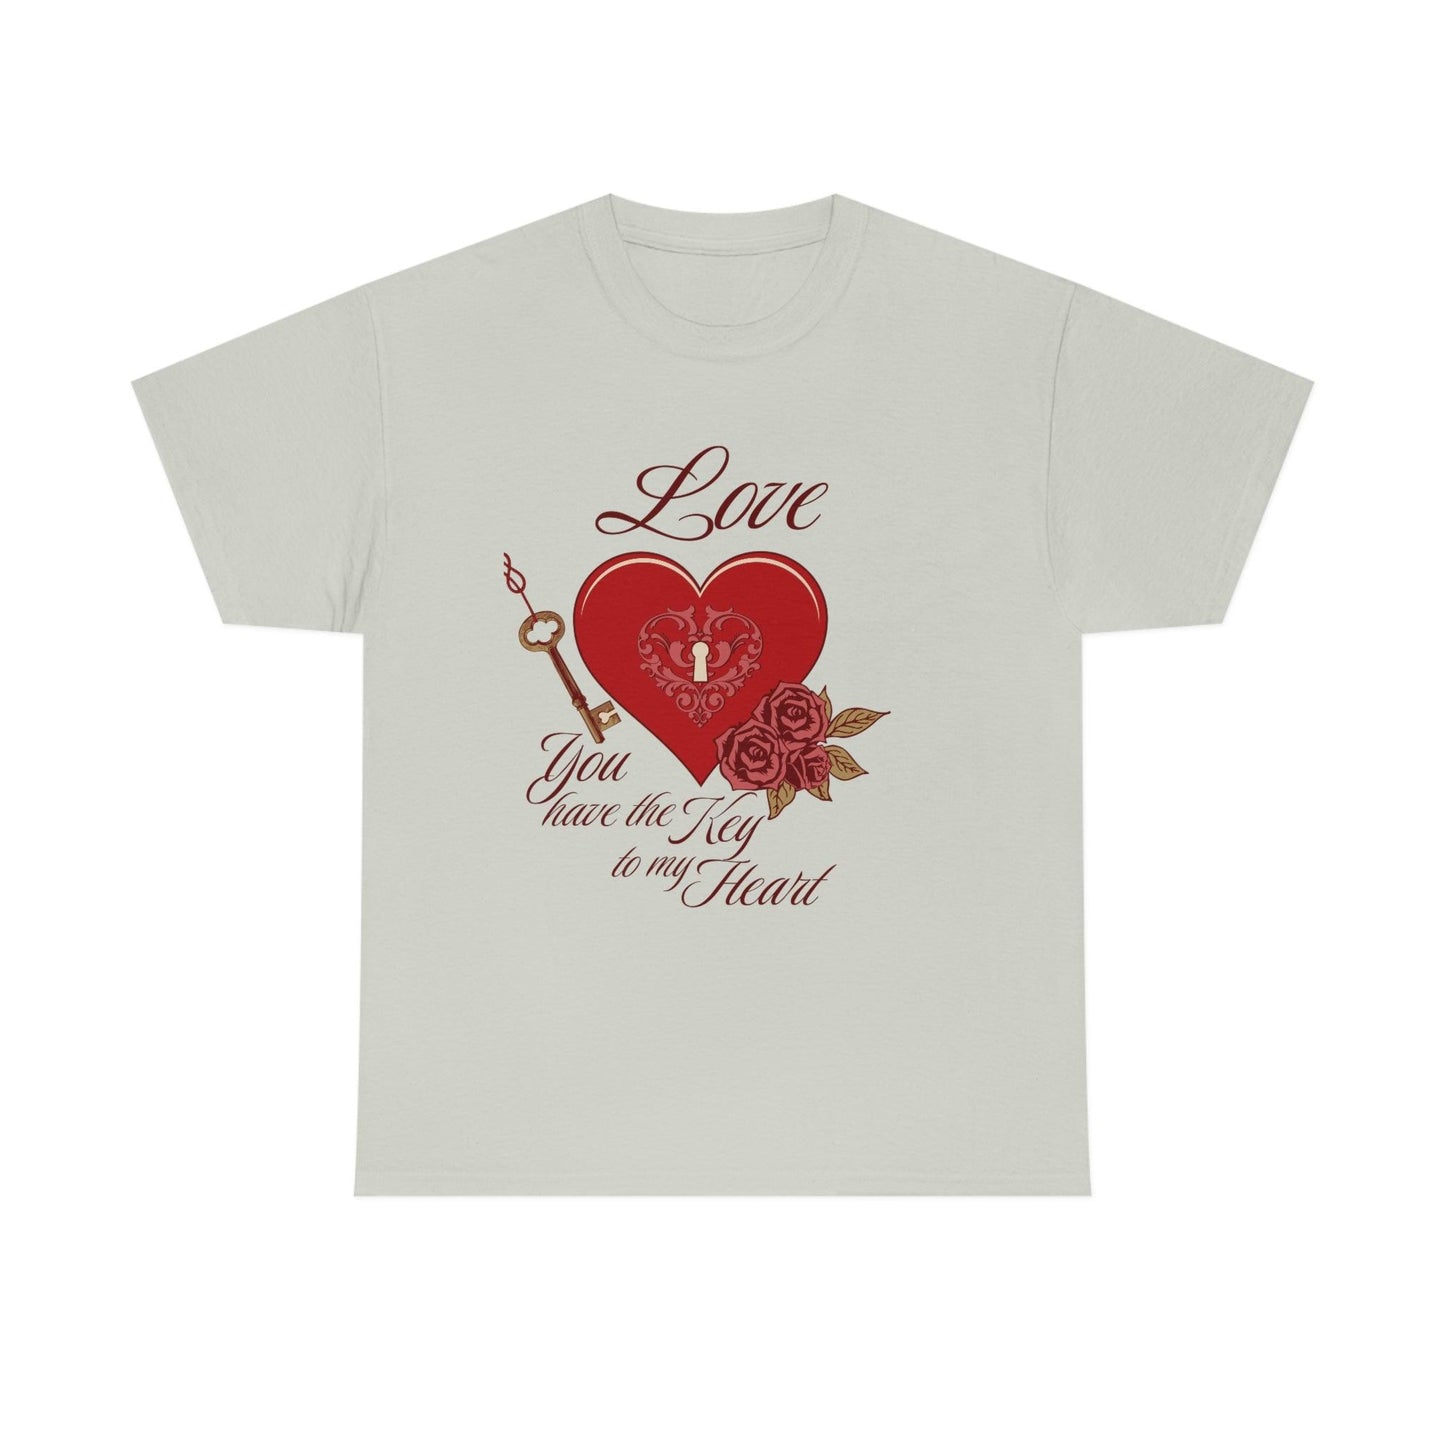 Love you have the keys to my heart Tee